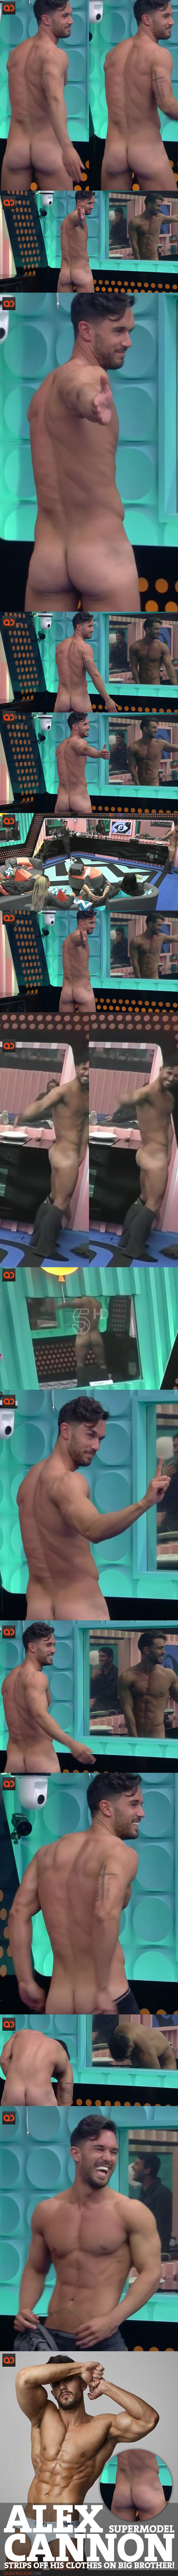 qc-supermodel_alex_cannon_strips_off_his_clothes_on_big_brother-collage02